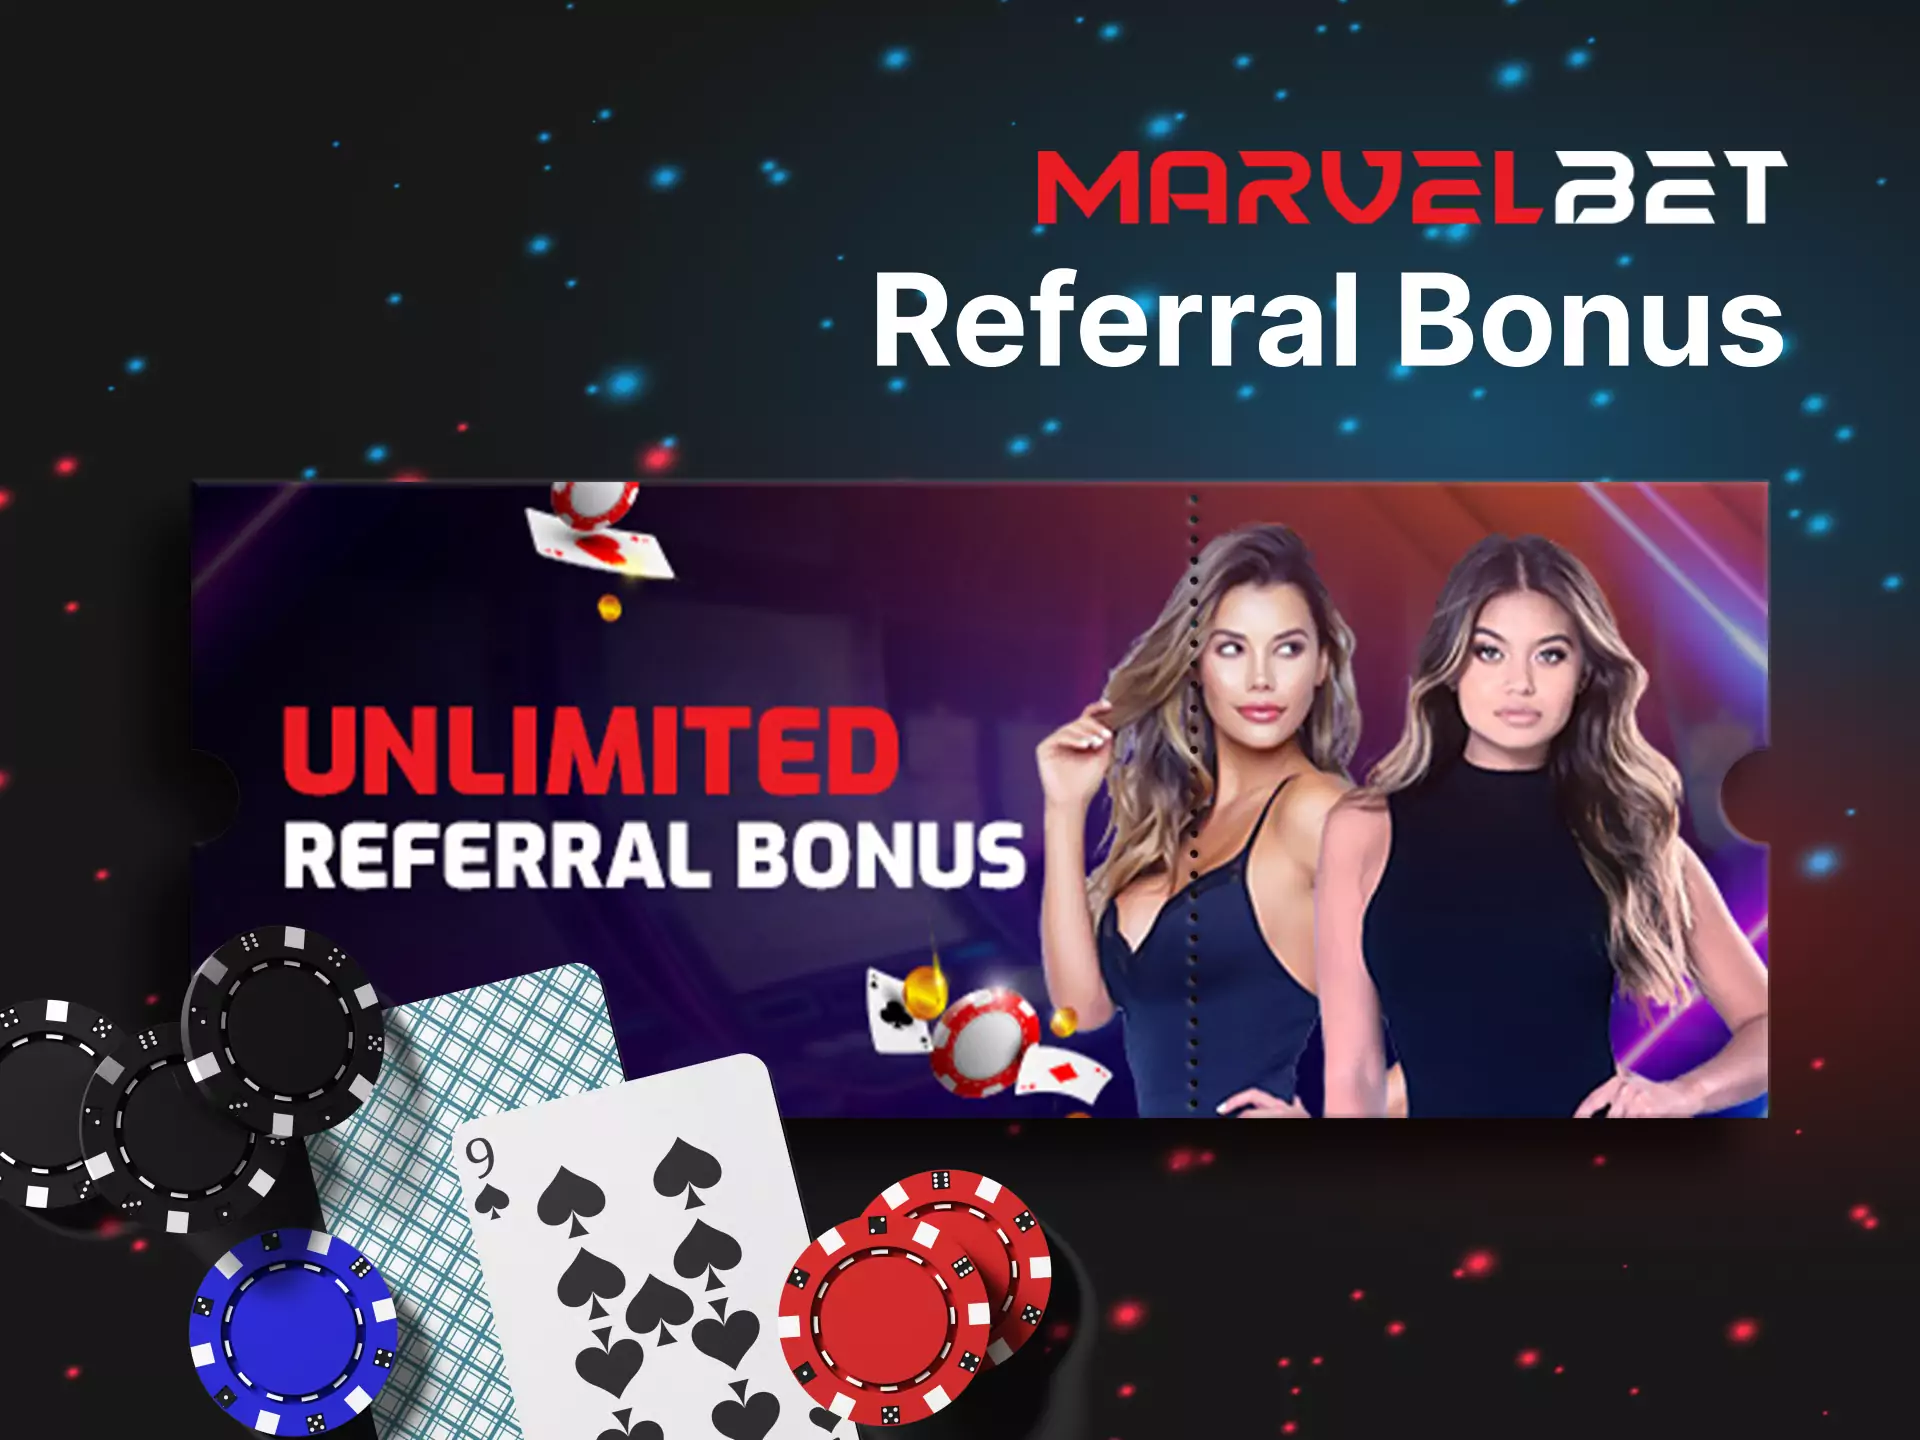 Invite your friends to Marvelbet and get the referral bonus from the bookie.